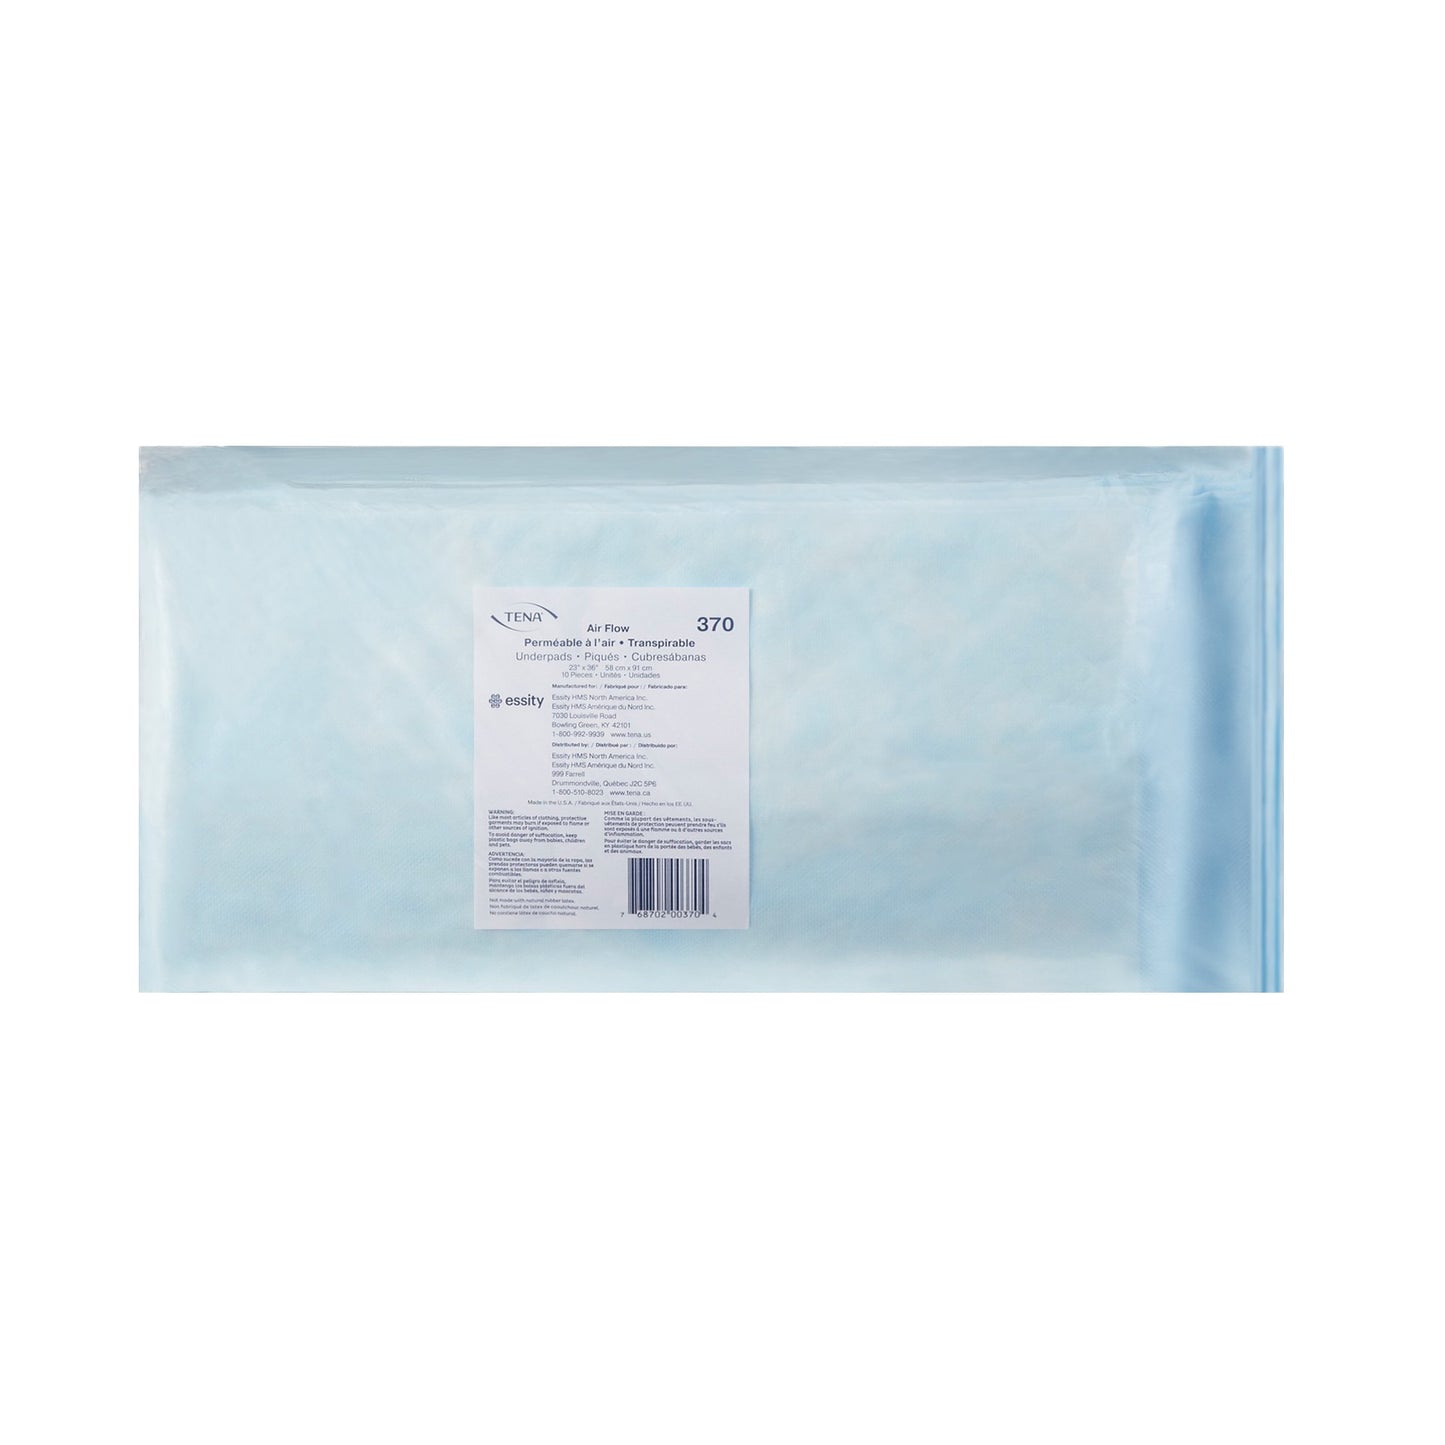 Tena® Air Flow Low Air Loss Underpad, 23 X 36 Inch, Sold As 1/Bag Essity 370